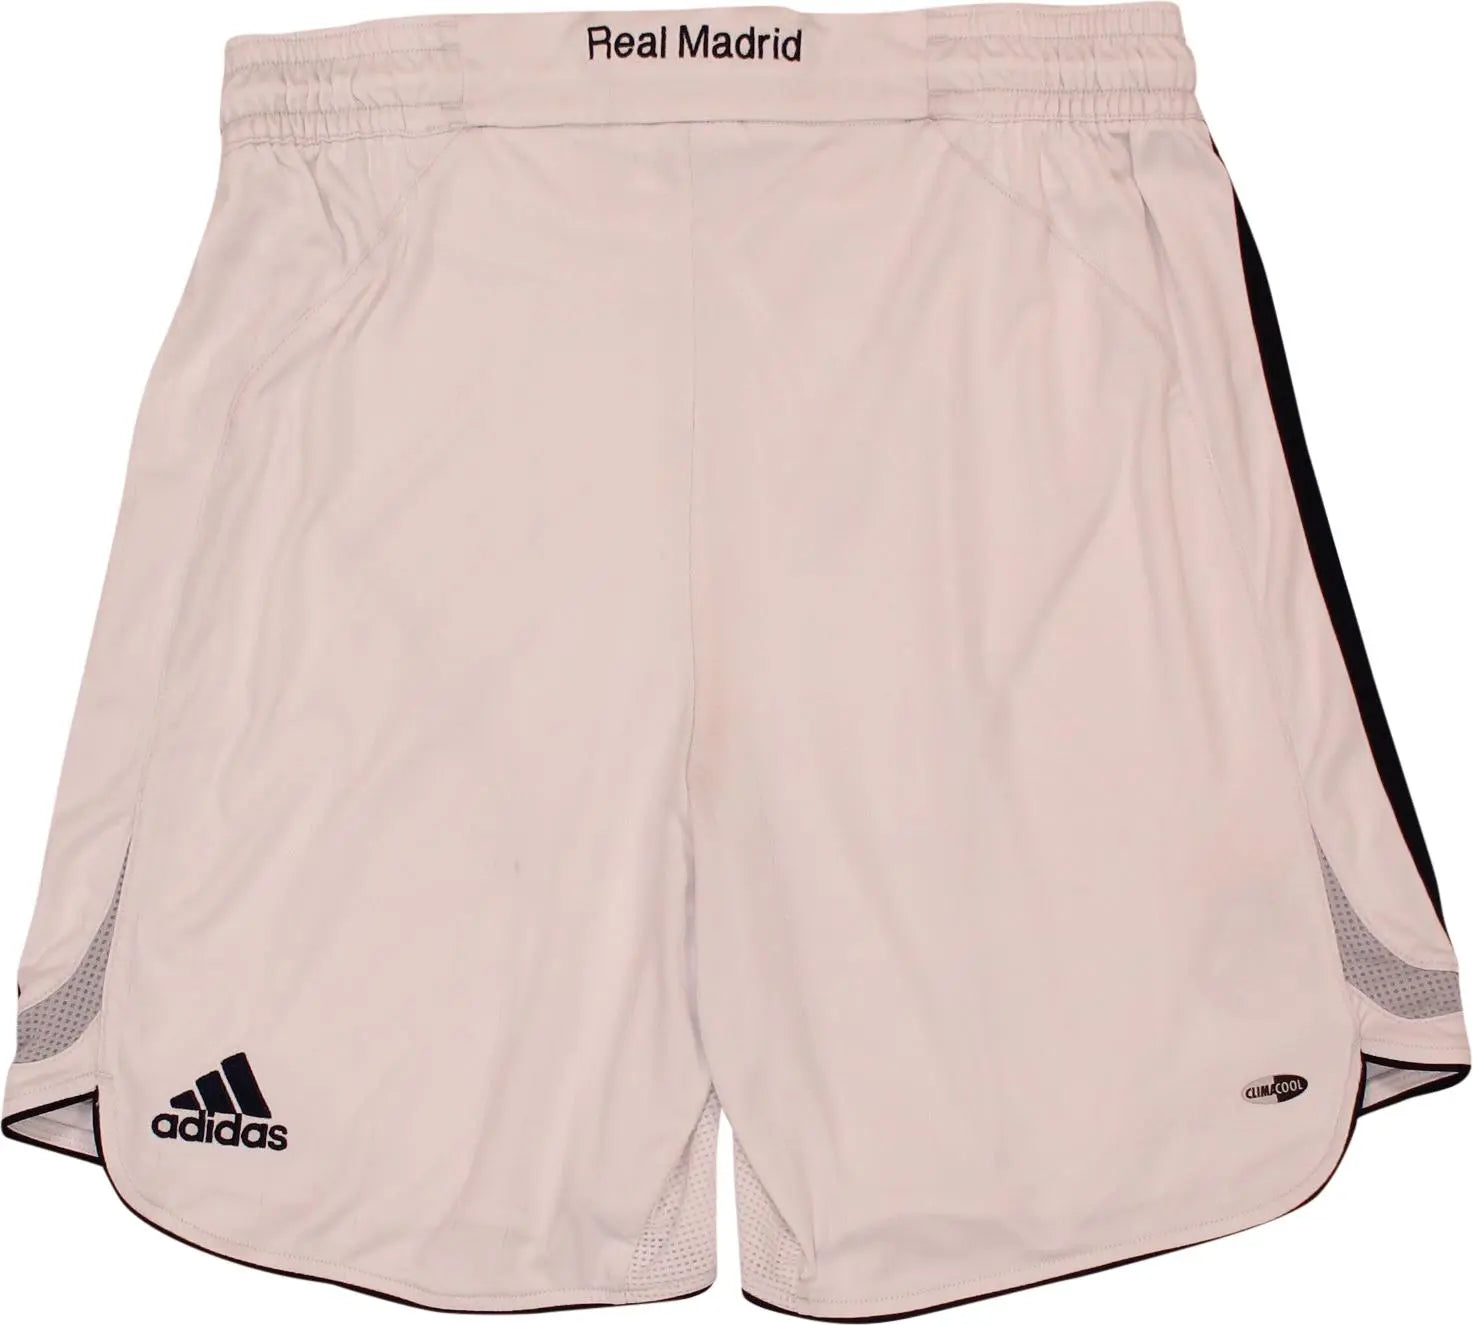 Adidas - Adidas Real Madrid Shorts- ThriftTale.com - Vintage and second handclothing